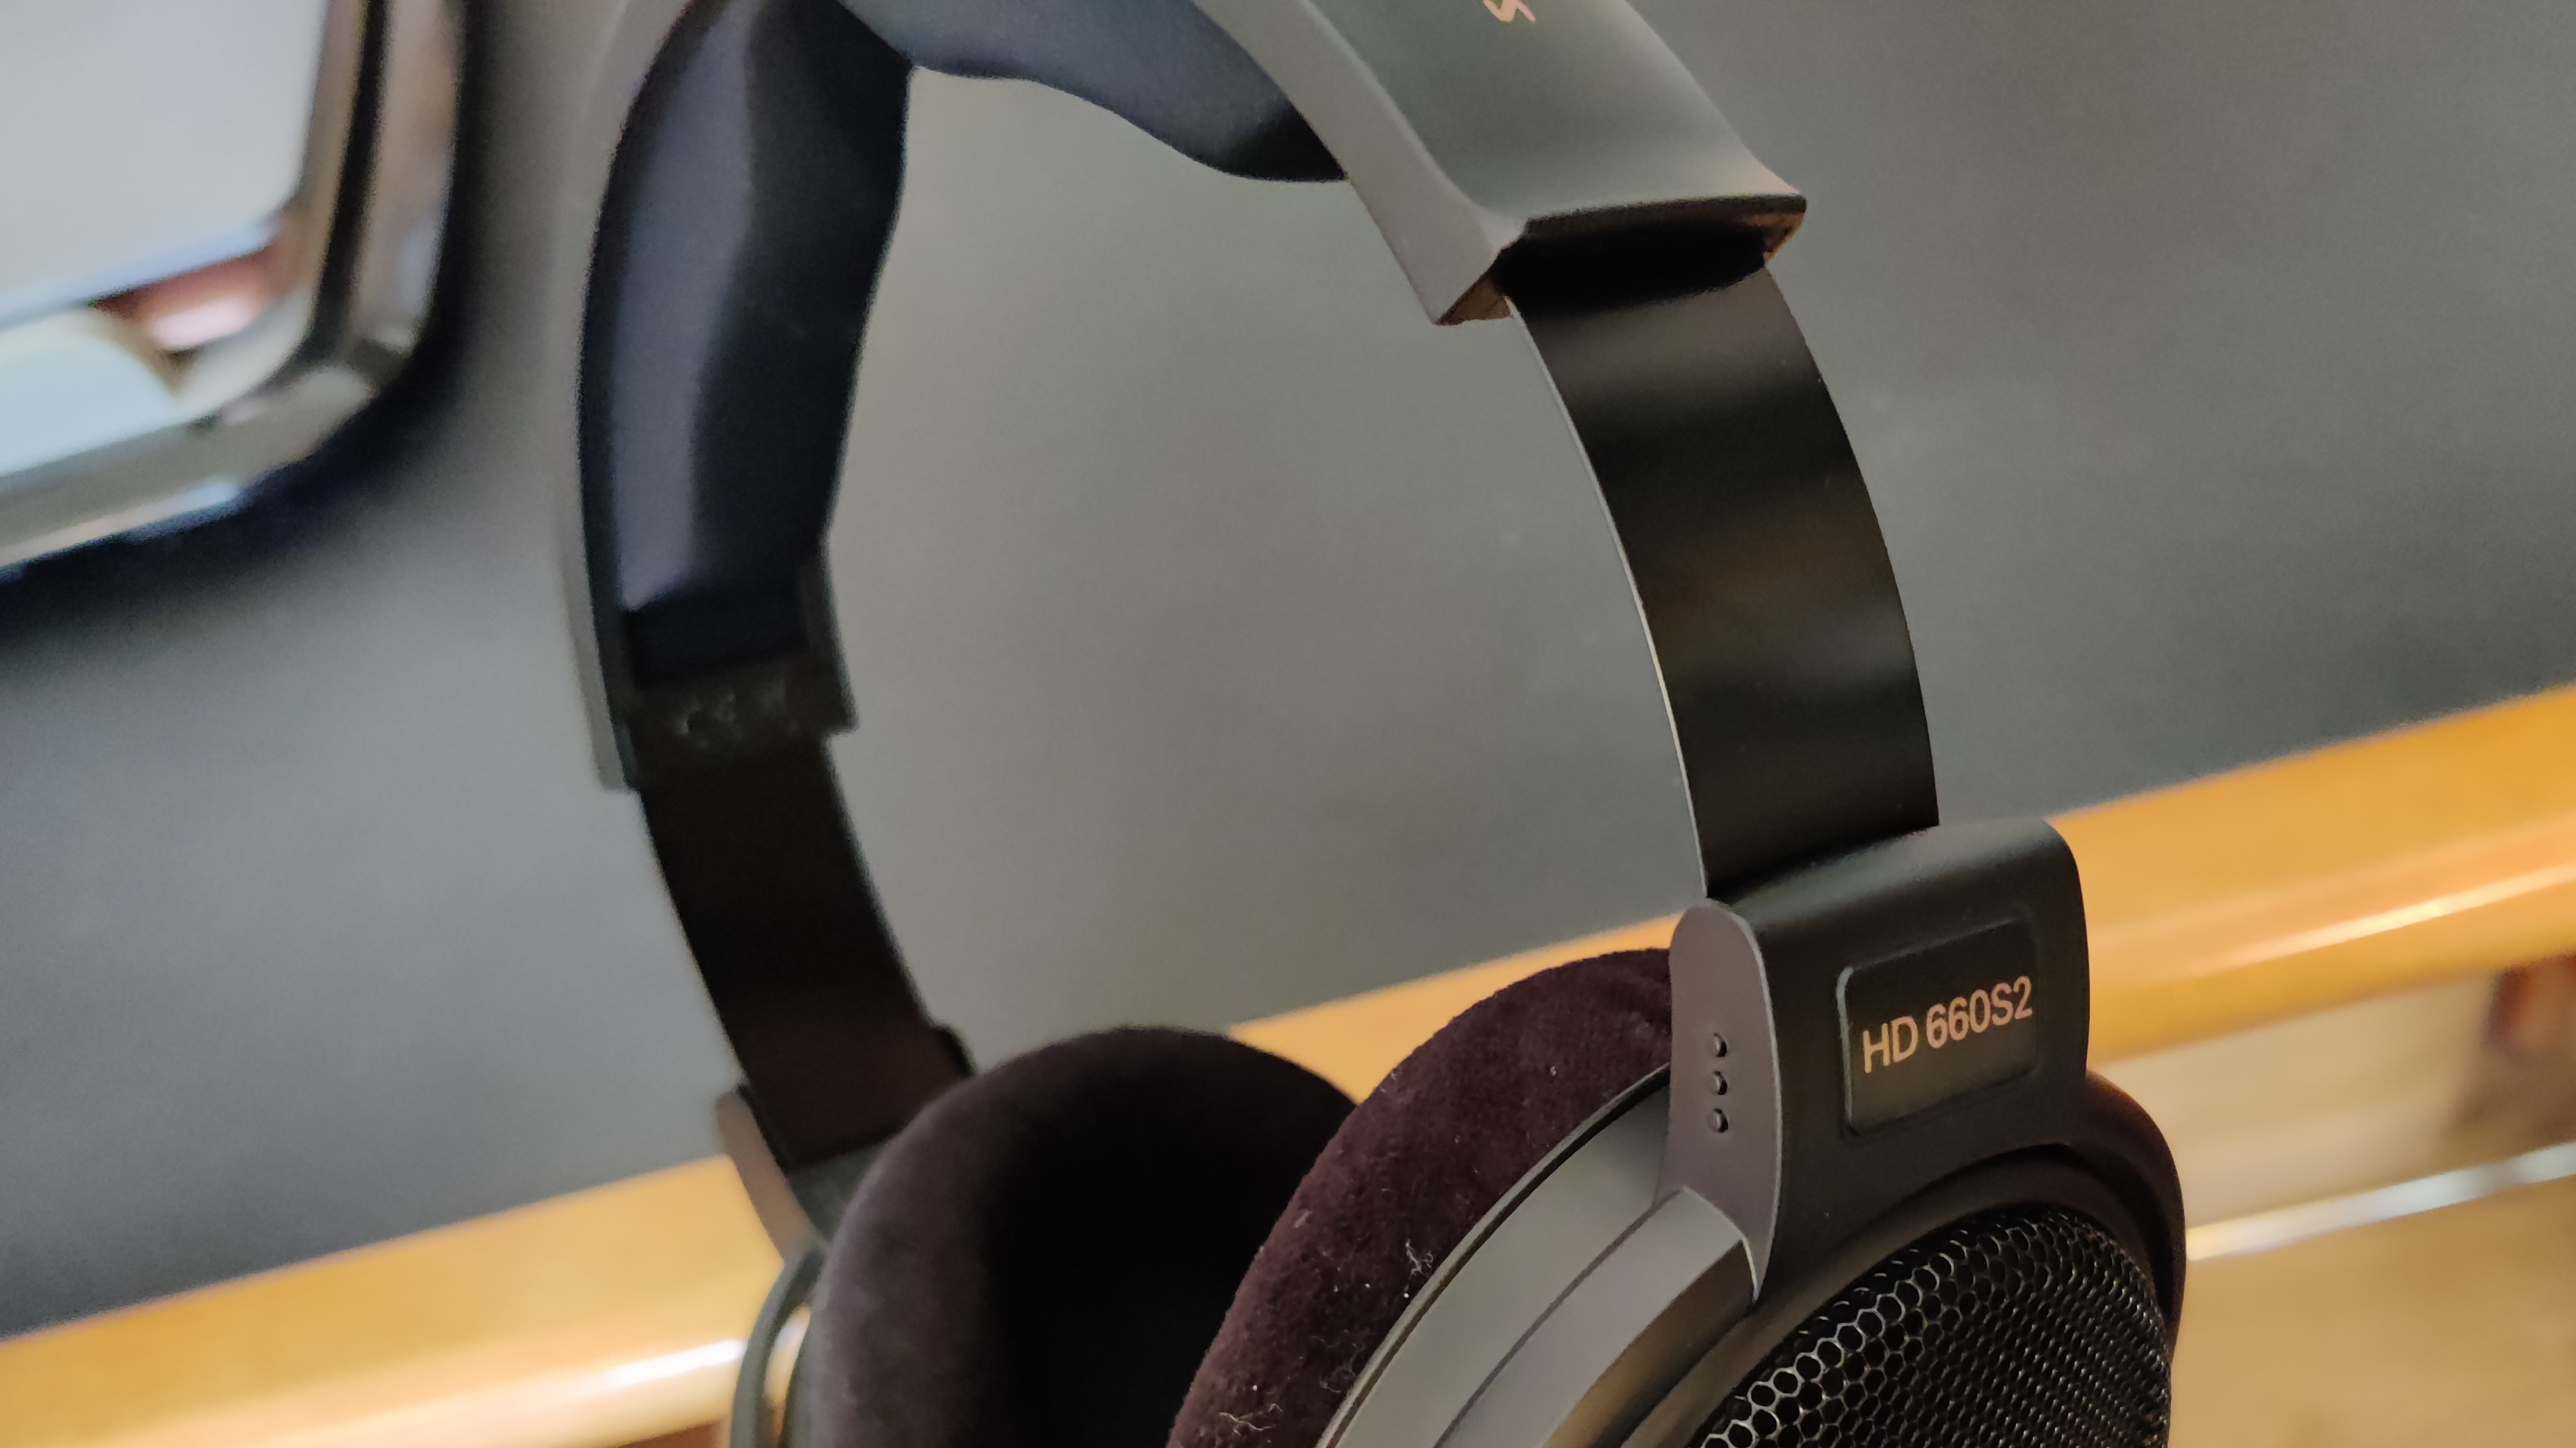 A close-up of the Sennheiser HD-660S2 headphones against a wooden surface.